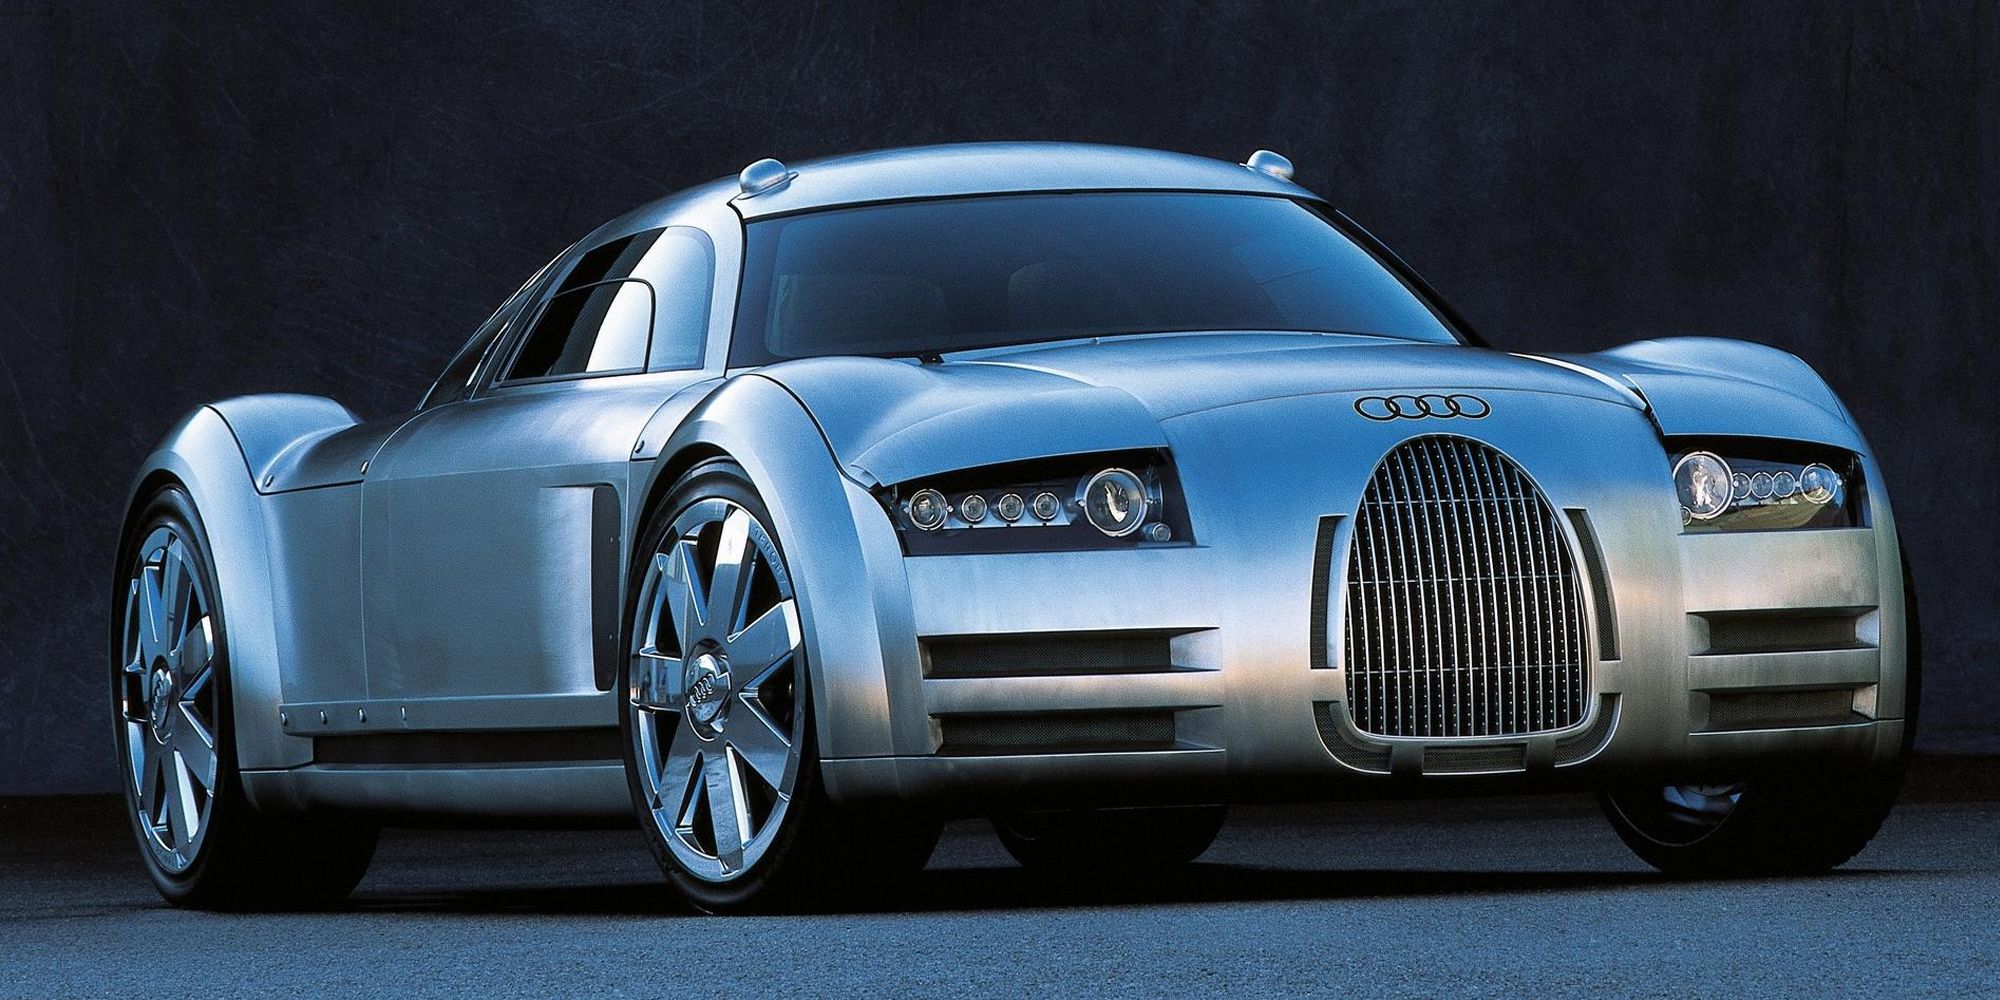 The front of the Audi Rosemeyer concept